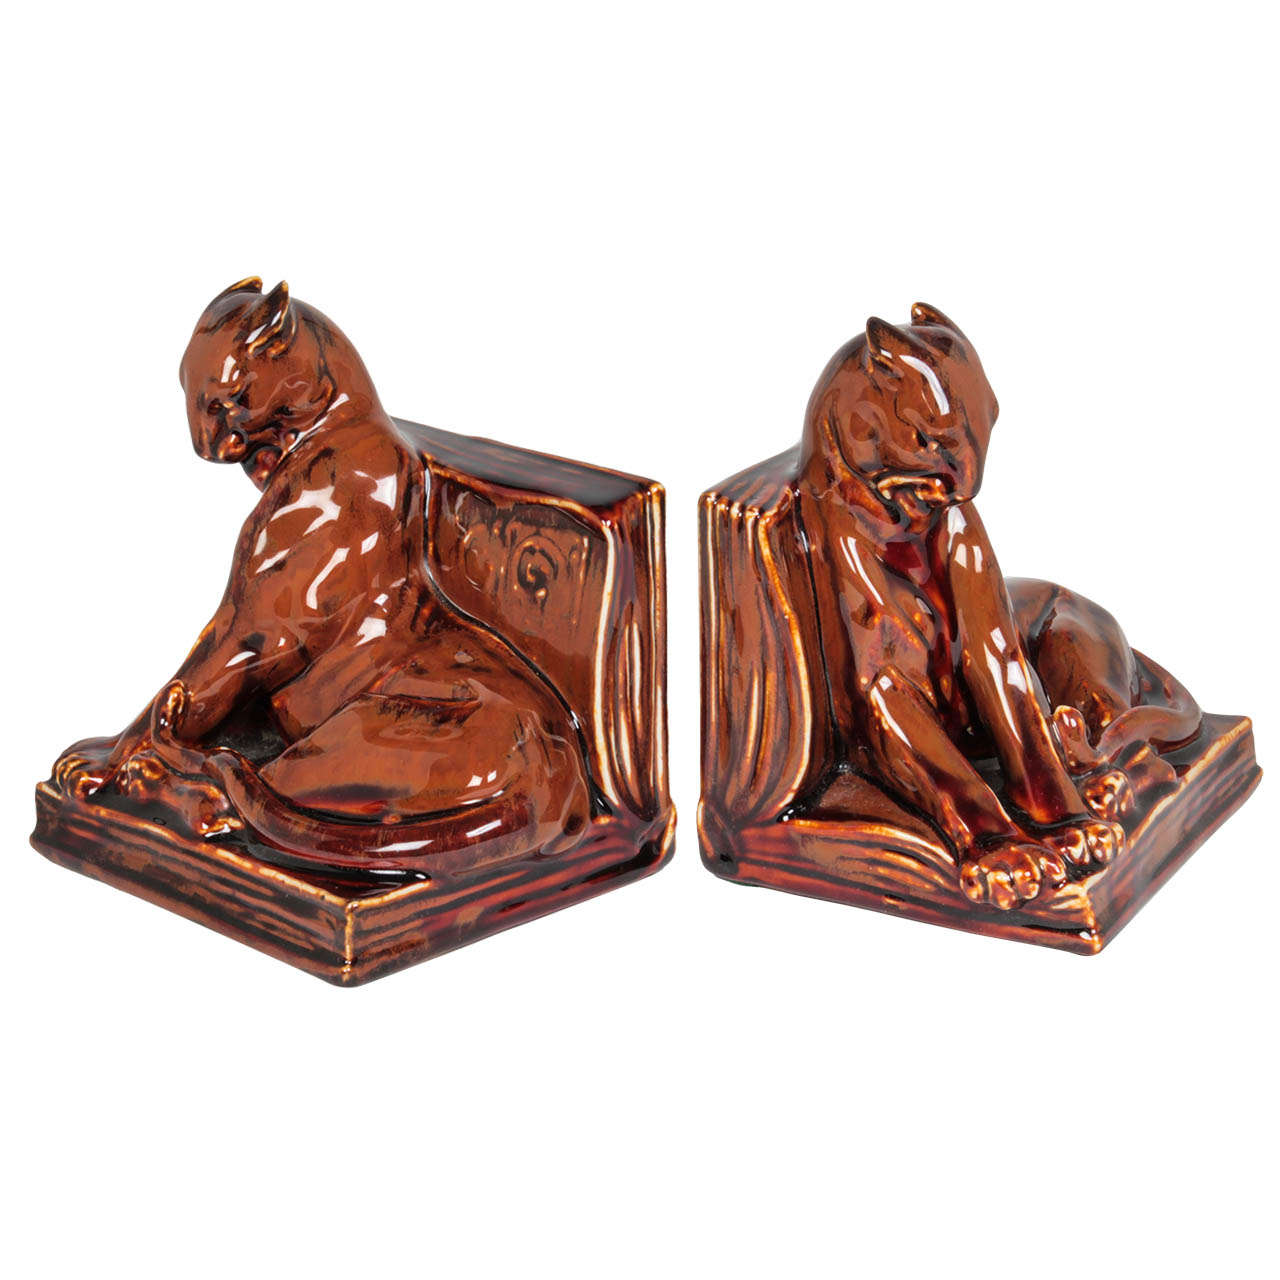 Rookwood / Margaret McDonald American Art Pottery Art Deco Rare "Panther" Bookends 1936 For Sale